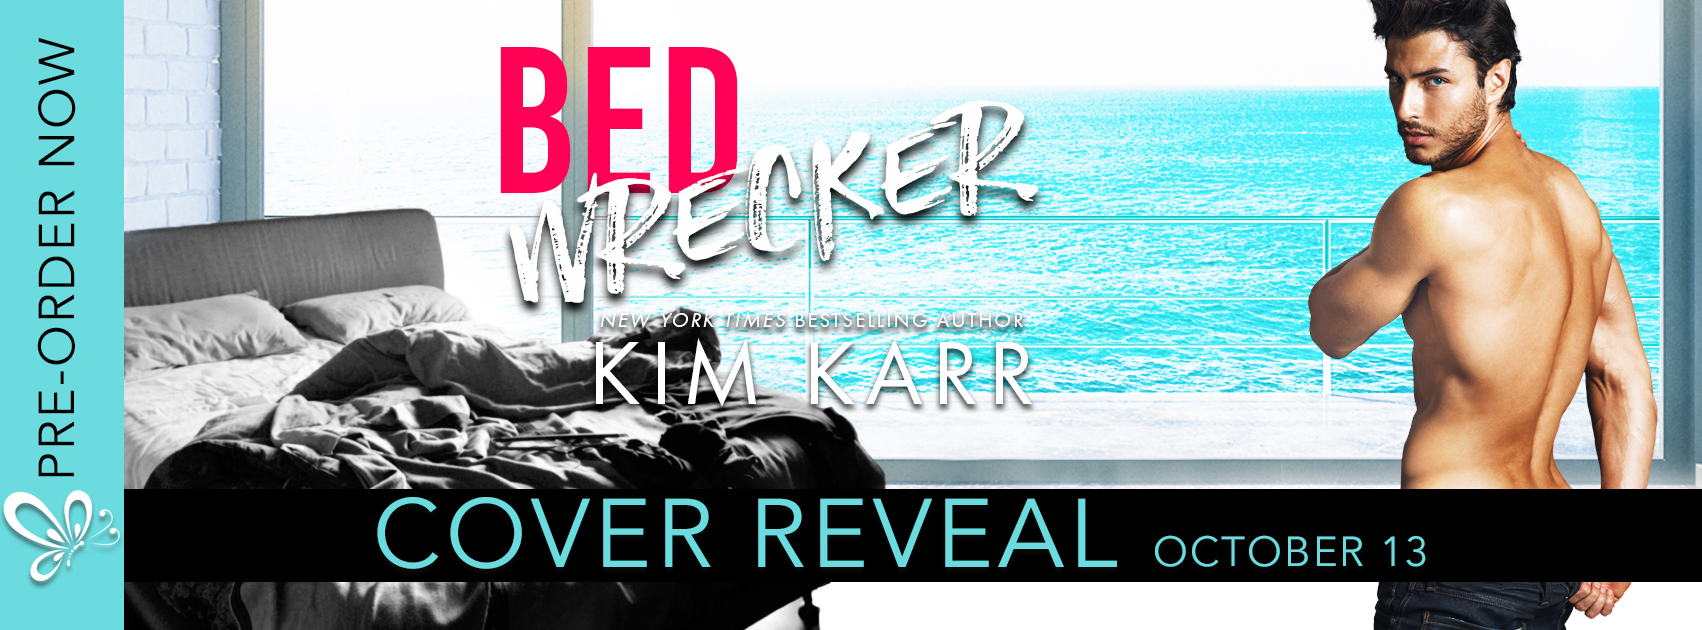 Bed Wrecker by Kim Karr #CoverReveal @authorkimkarr